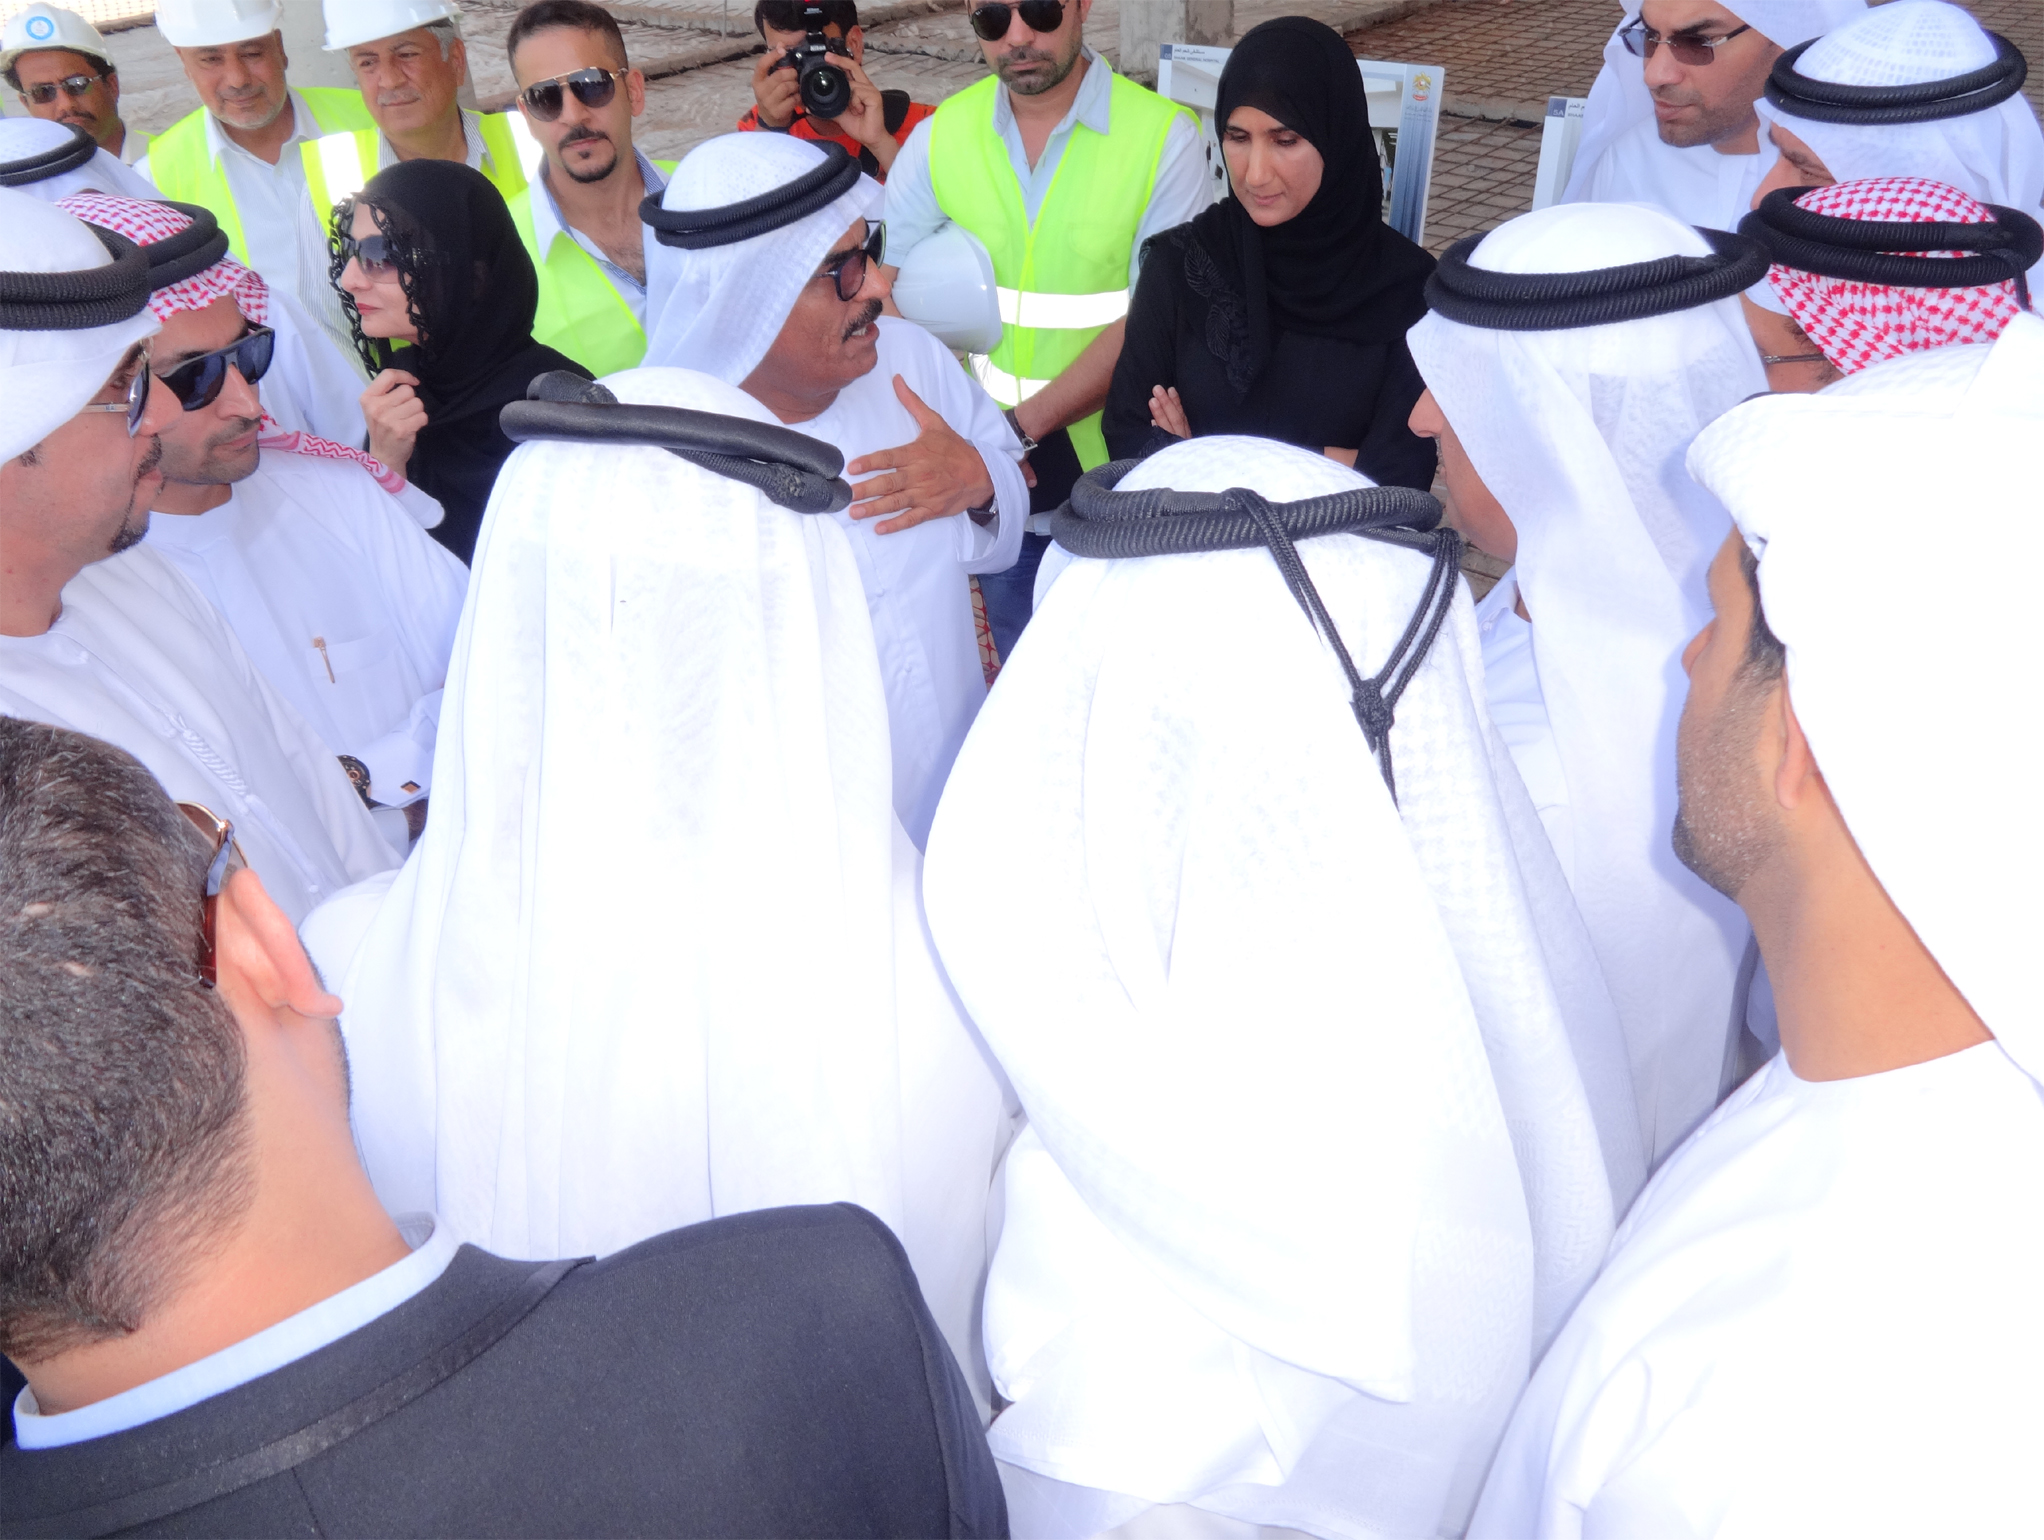 The Visit of H.E Dr. Abdullah Belhaif AlNuaimi, Minister of Public Works to shaam General Hospital Project at RAK